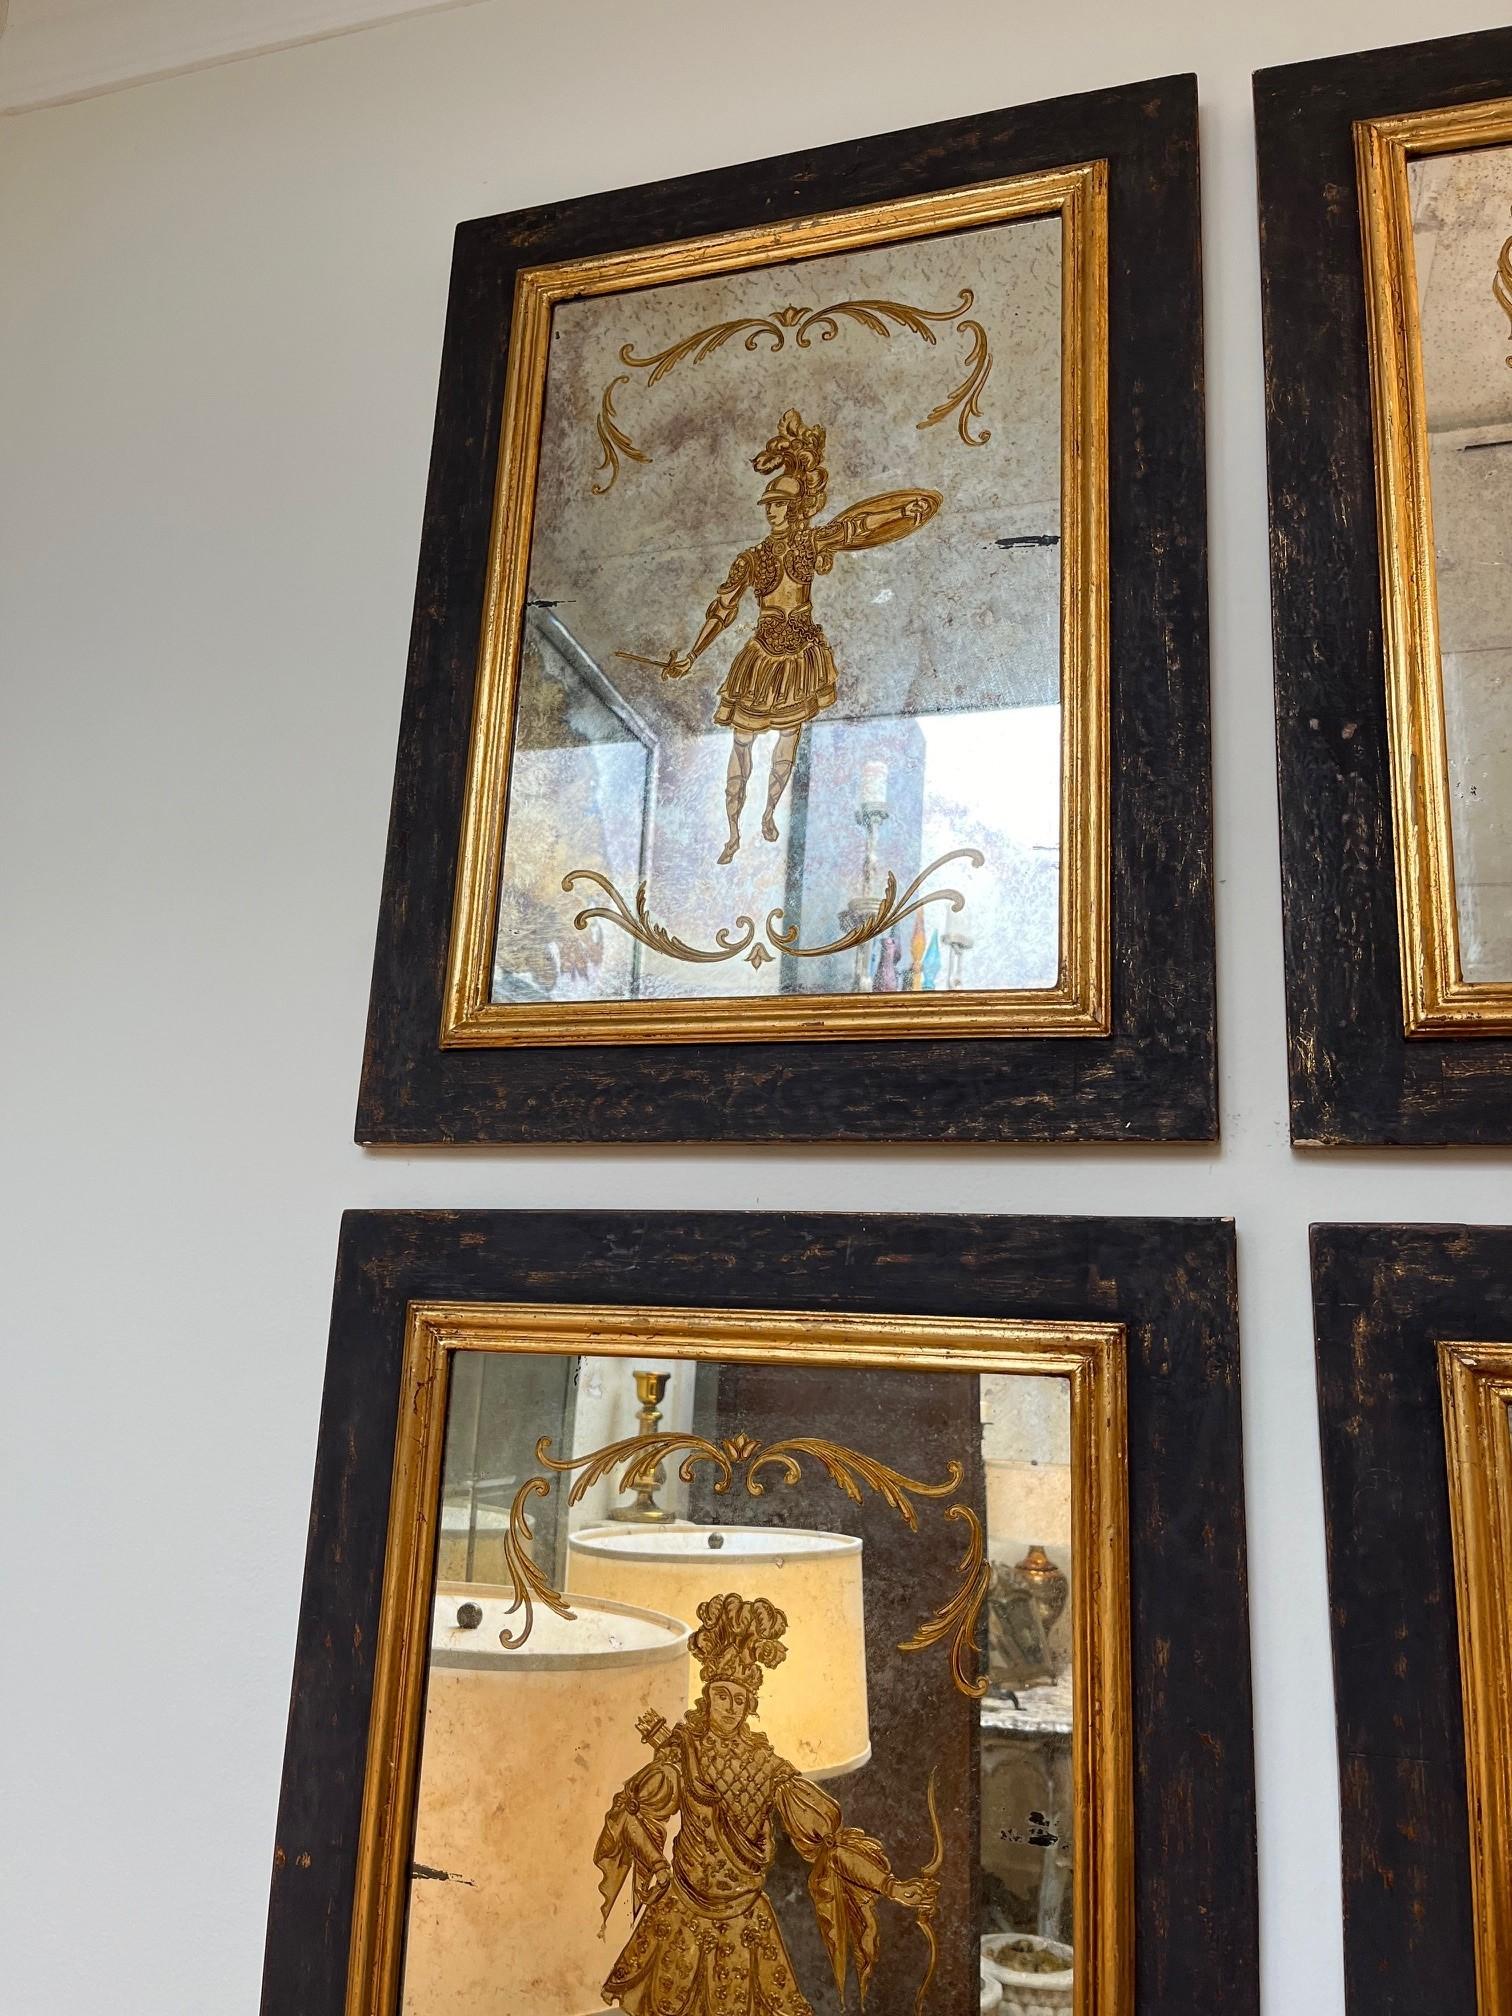 Set of five German Engraved and parcel Gilt Mirror Panels, Each engraved mirrored panel portrays a different character with hand painting and gilt detailing.